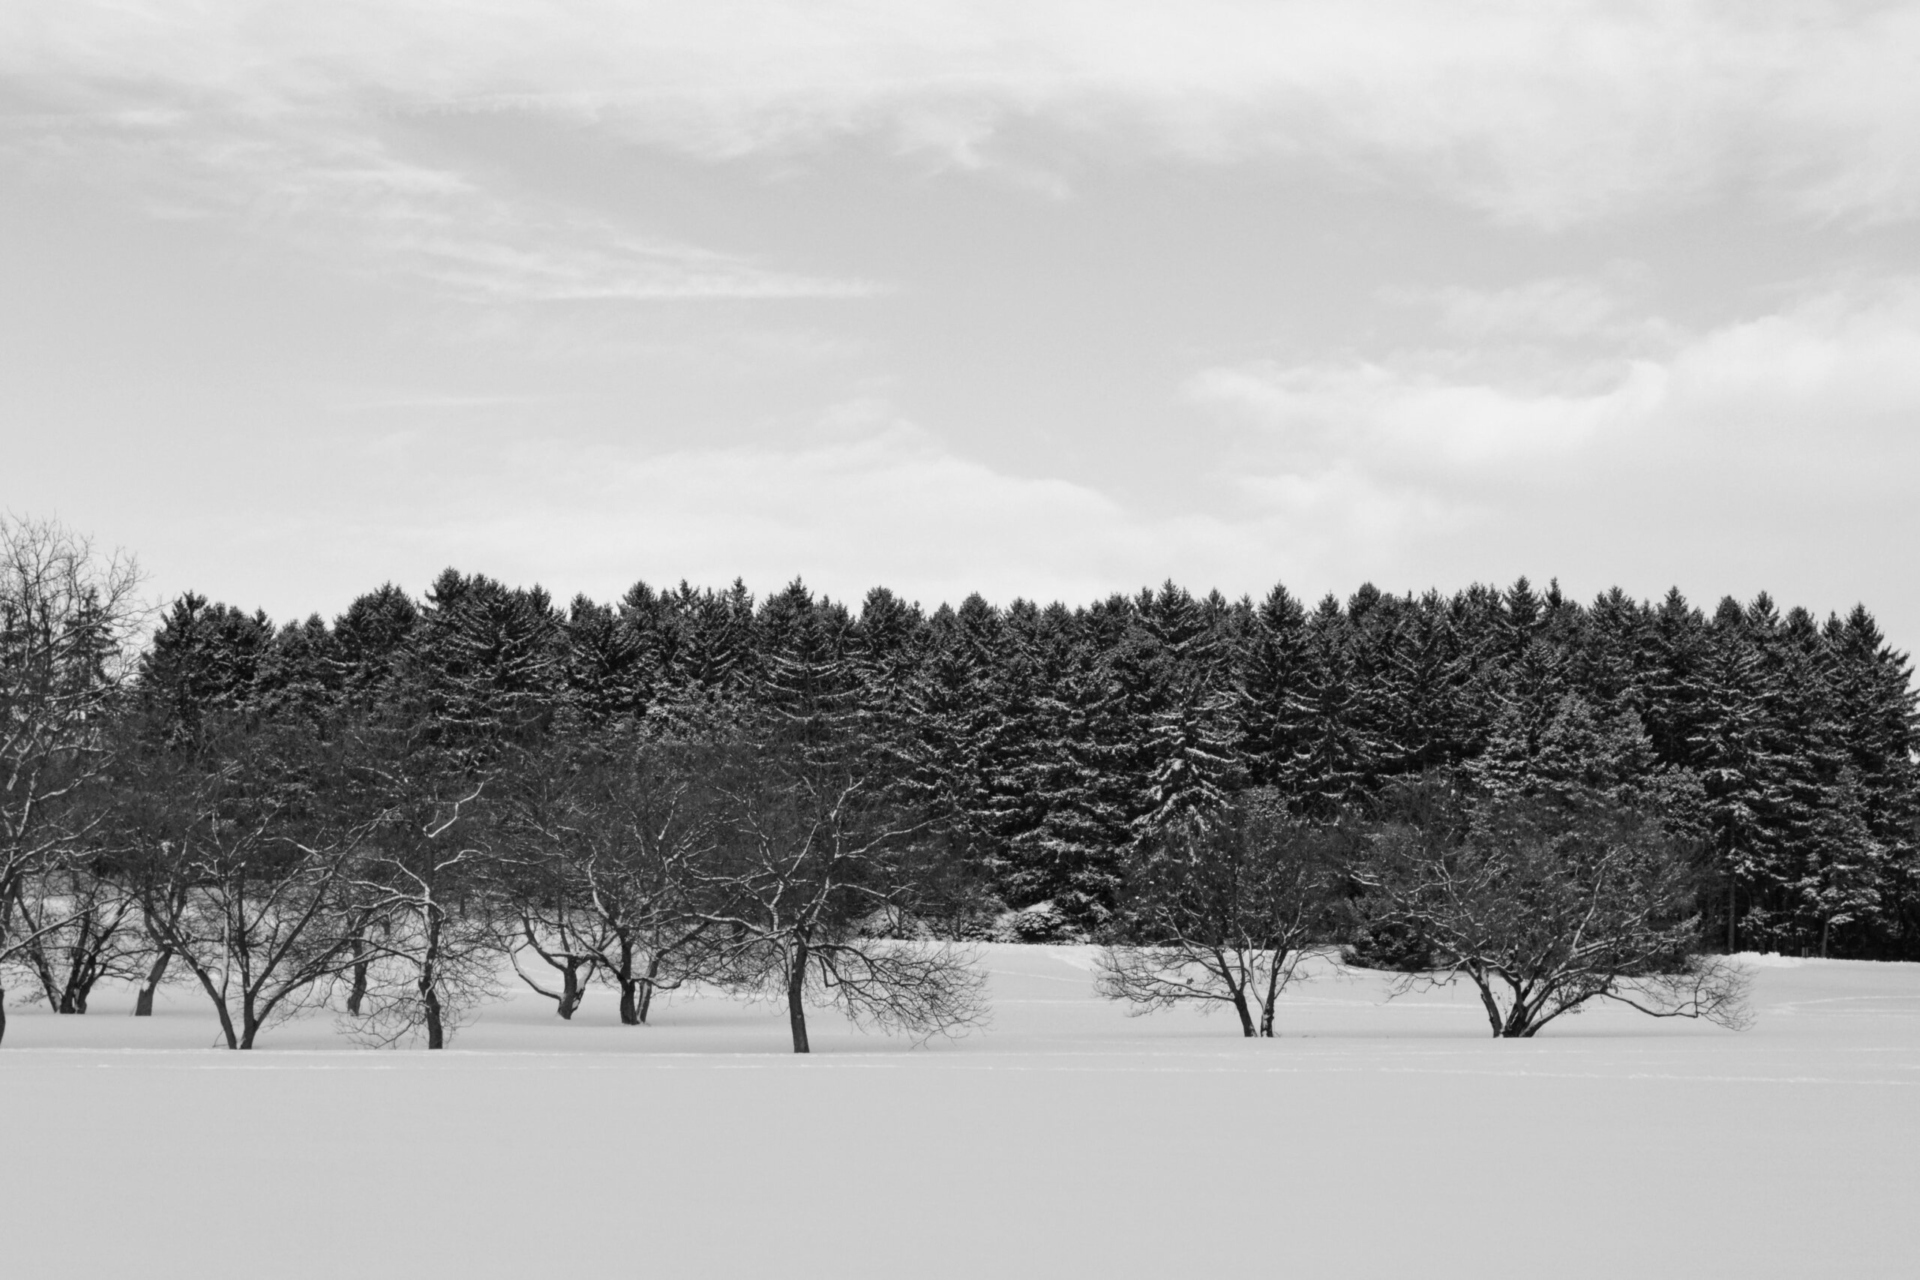 A snowy winter landscape in black and white.